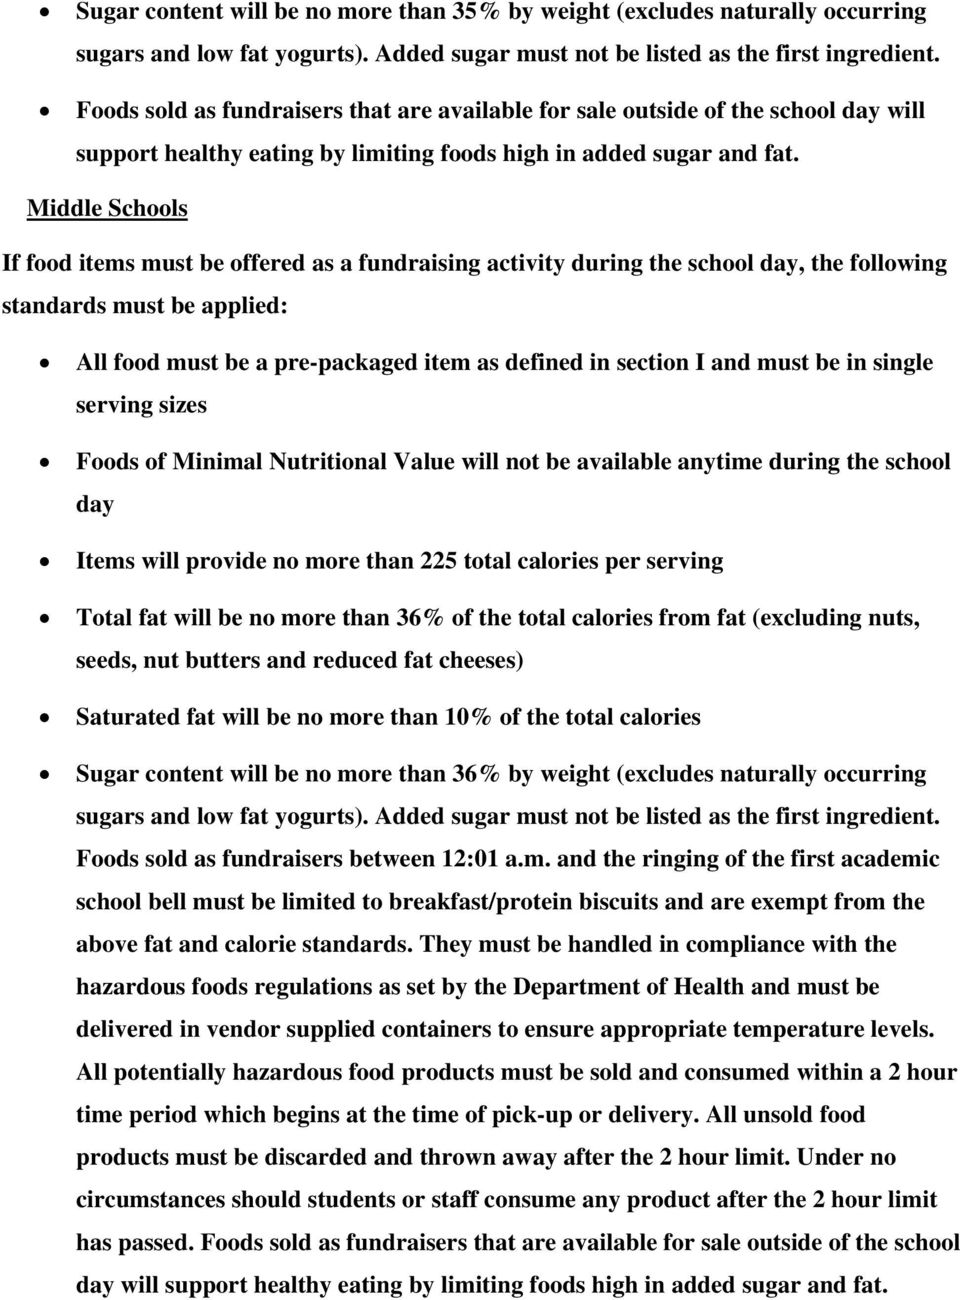 Middle Schools If food items must be offered as a fundraising activity during the school day, the following standards must be applied: All food must be a pre-packaged item as defined in section I and